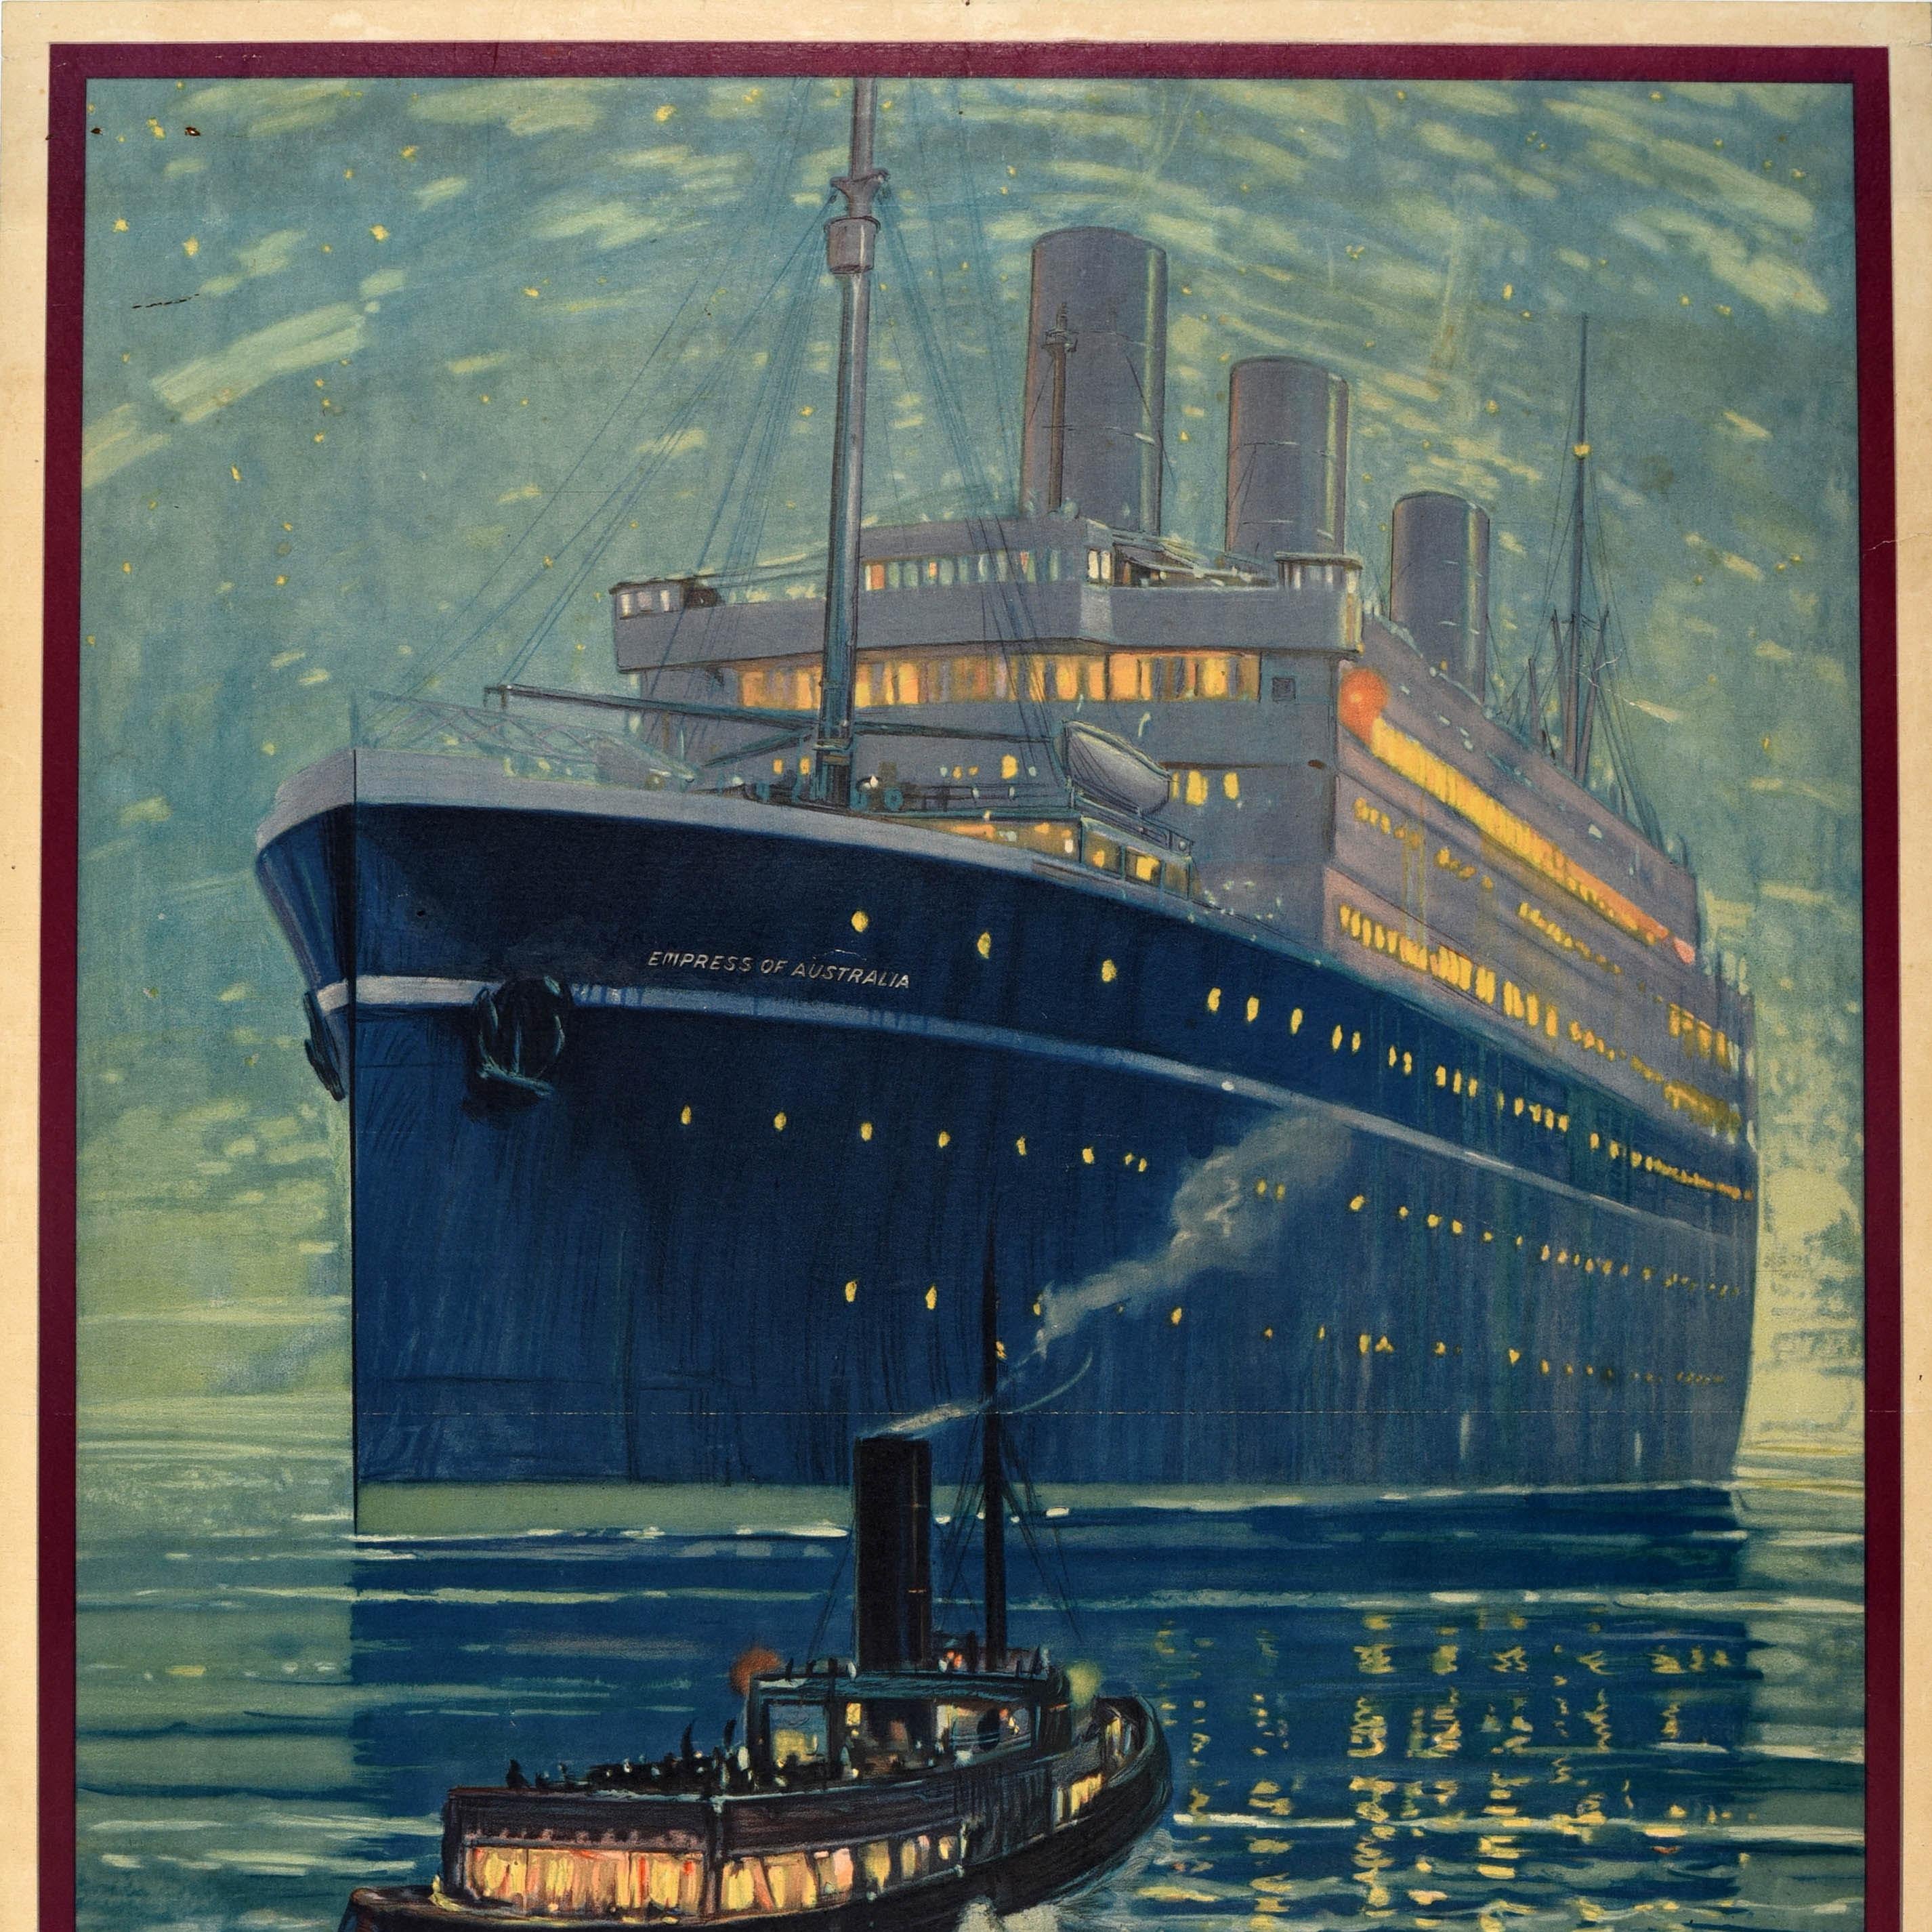 Original vintage cruise ship travel poster - Canadian Pacific Empress of Australia Europe Canada USA - featuring a night time seascape by Alfred Crocker Leighton (1901-1956) depicting a small steam boat approaching the Empress of Australia ocean